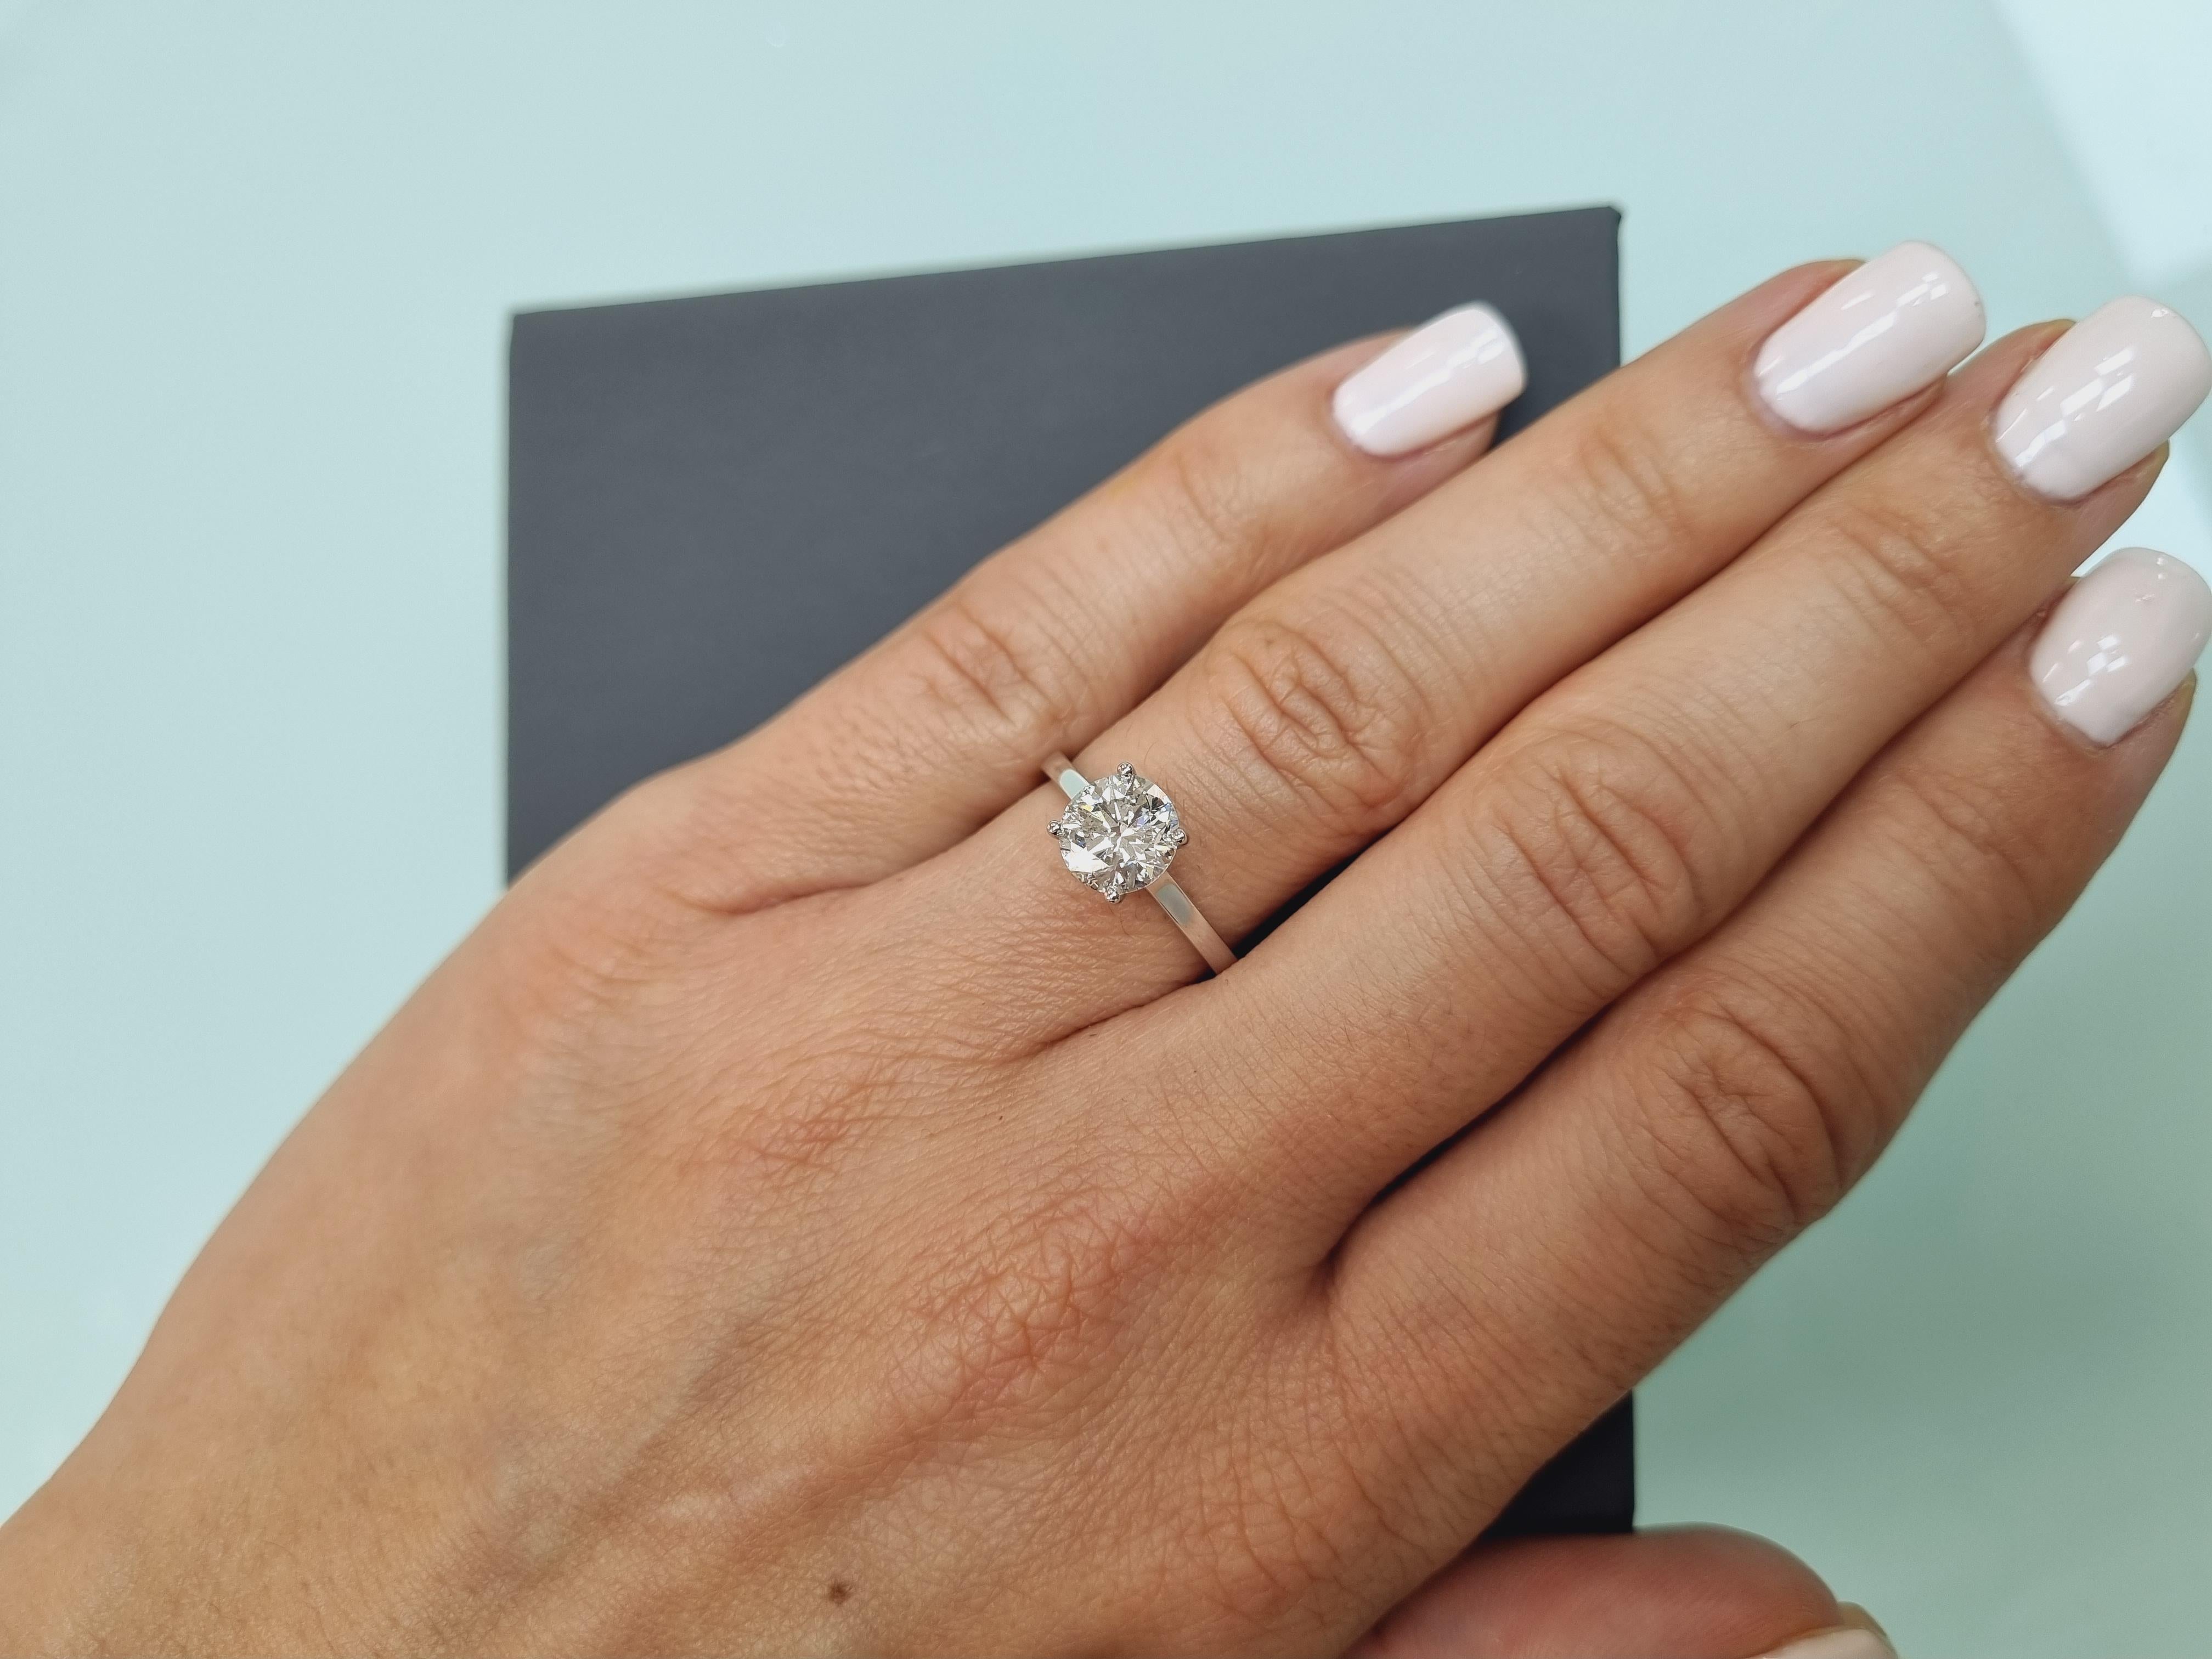 Elevate your love story with this stunning Martin Oliva engagement ring, a testament to timeless elegance and enduring commitment. Crafted from lustrous 18k white gold, this solitaire ring is a harmonious blend of sophistication and simplicity. The